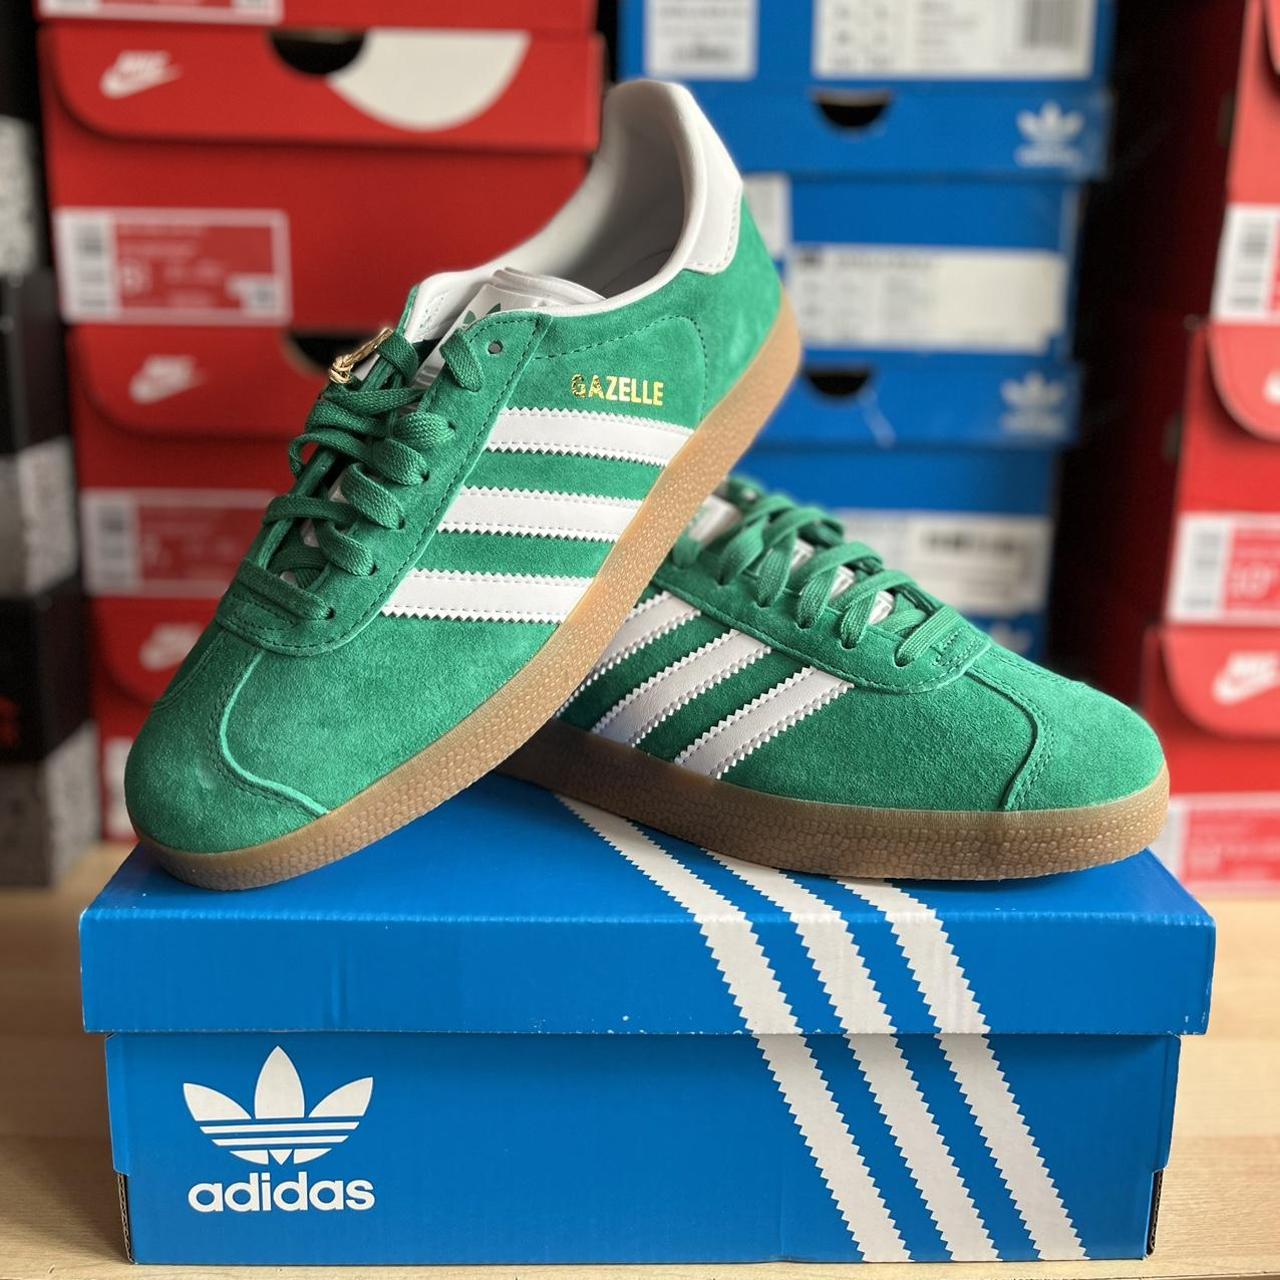 Adidas Gazelle Court Green 🍀 - Free Delivery to the... - Depop